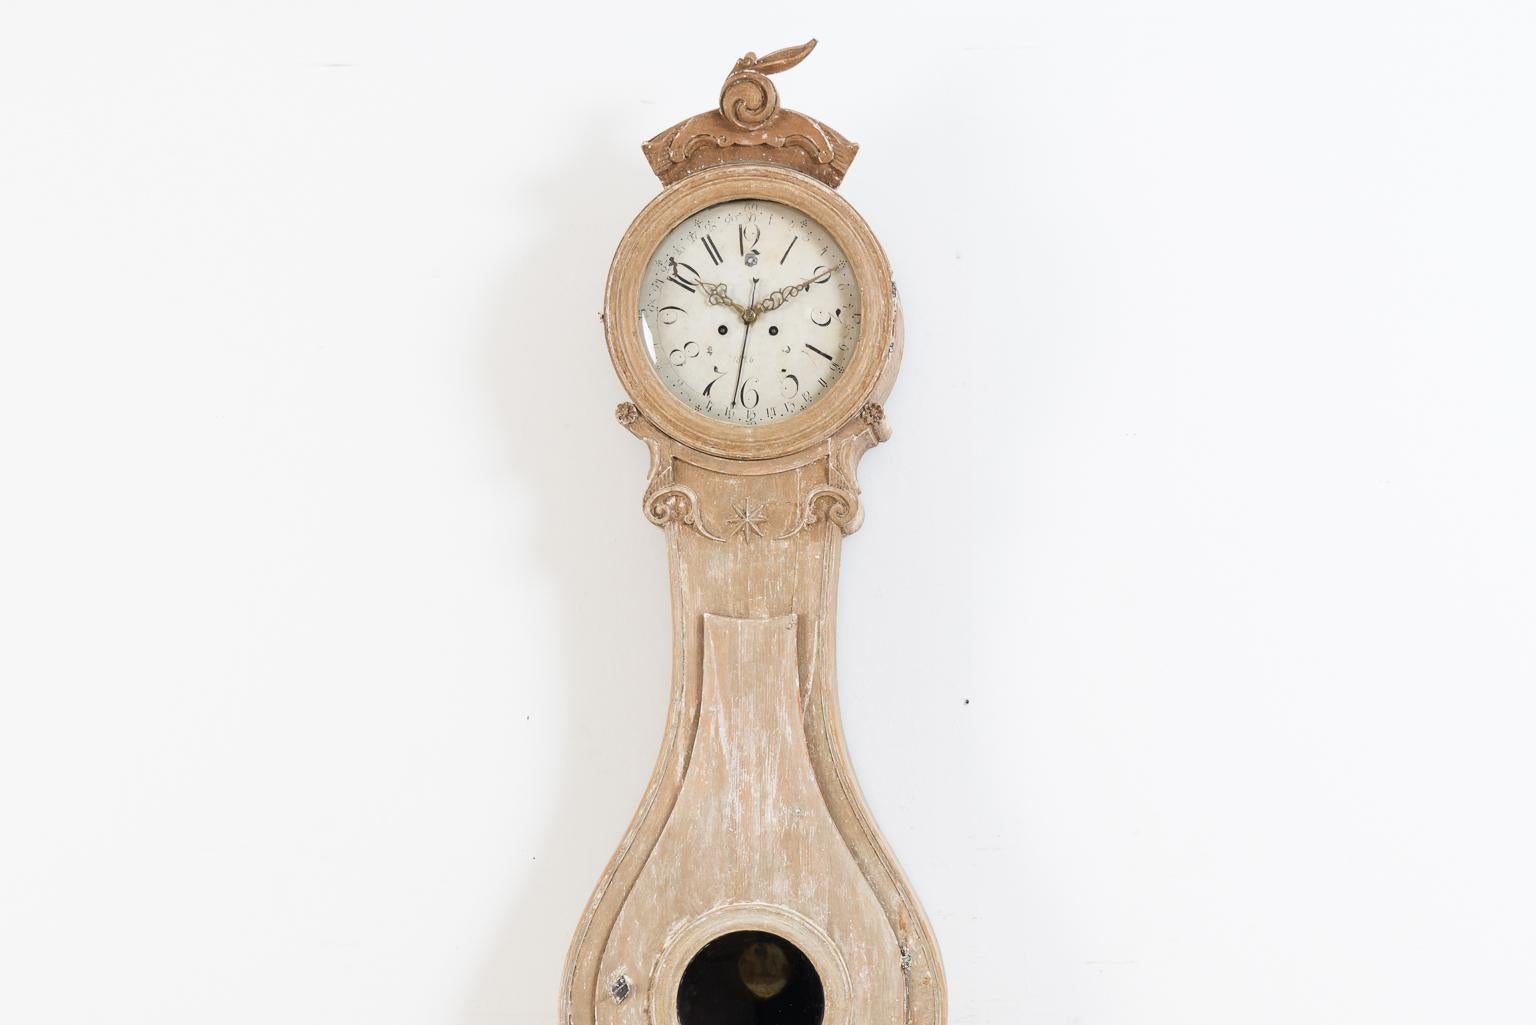 Rococo long case clock from Fryksdalen in Värmland, northern Sweden. The model is often called Fryksdalsur in Swedish after the place it was manufactured - Fryksdalen - and 'ur' being the Swedish word for clock. The clock is dry scraped to original